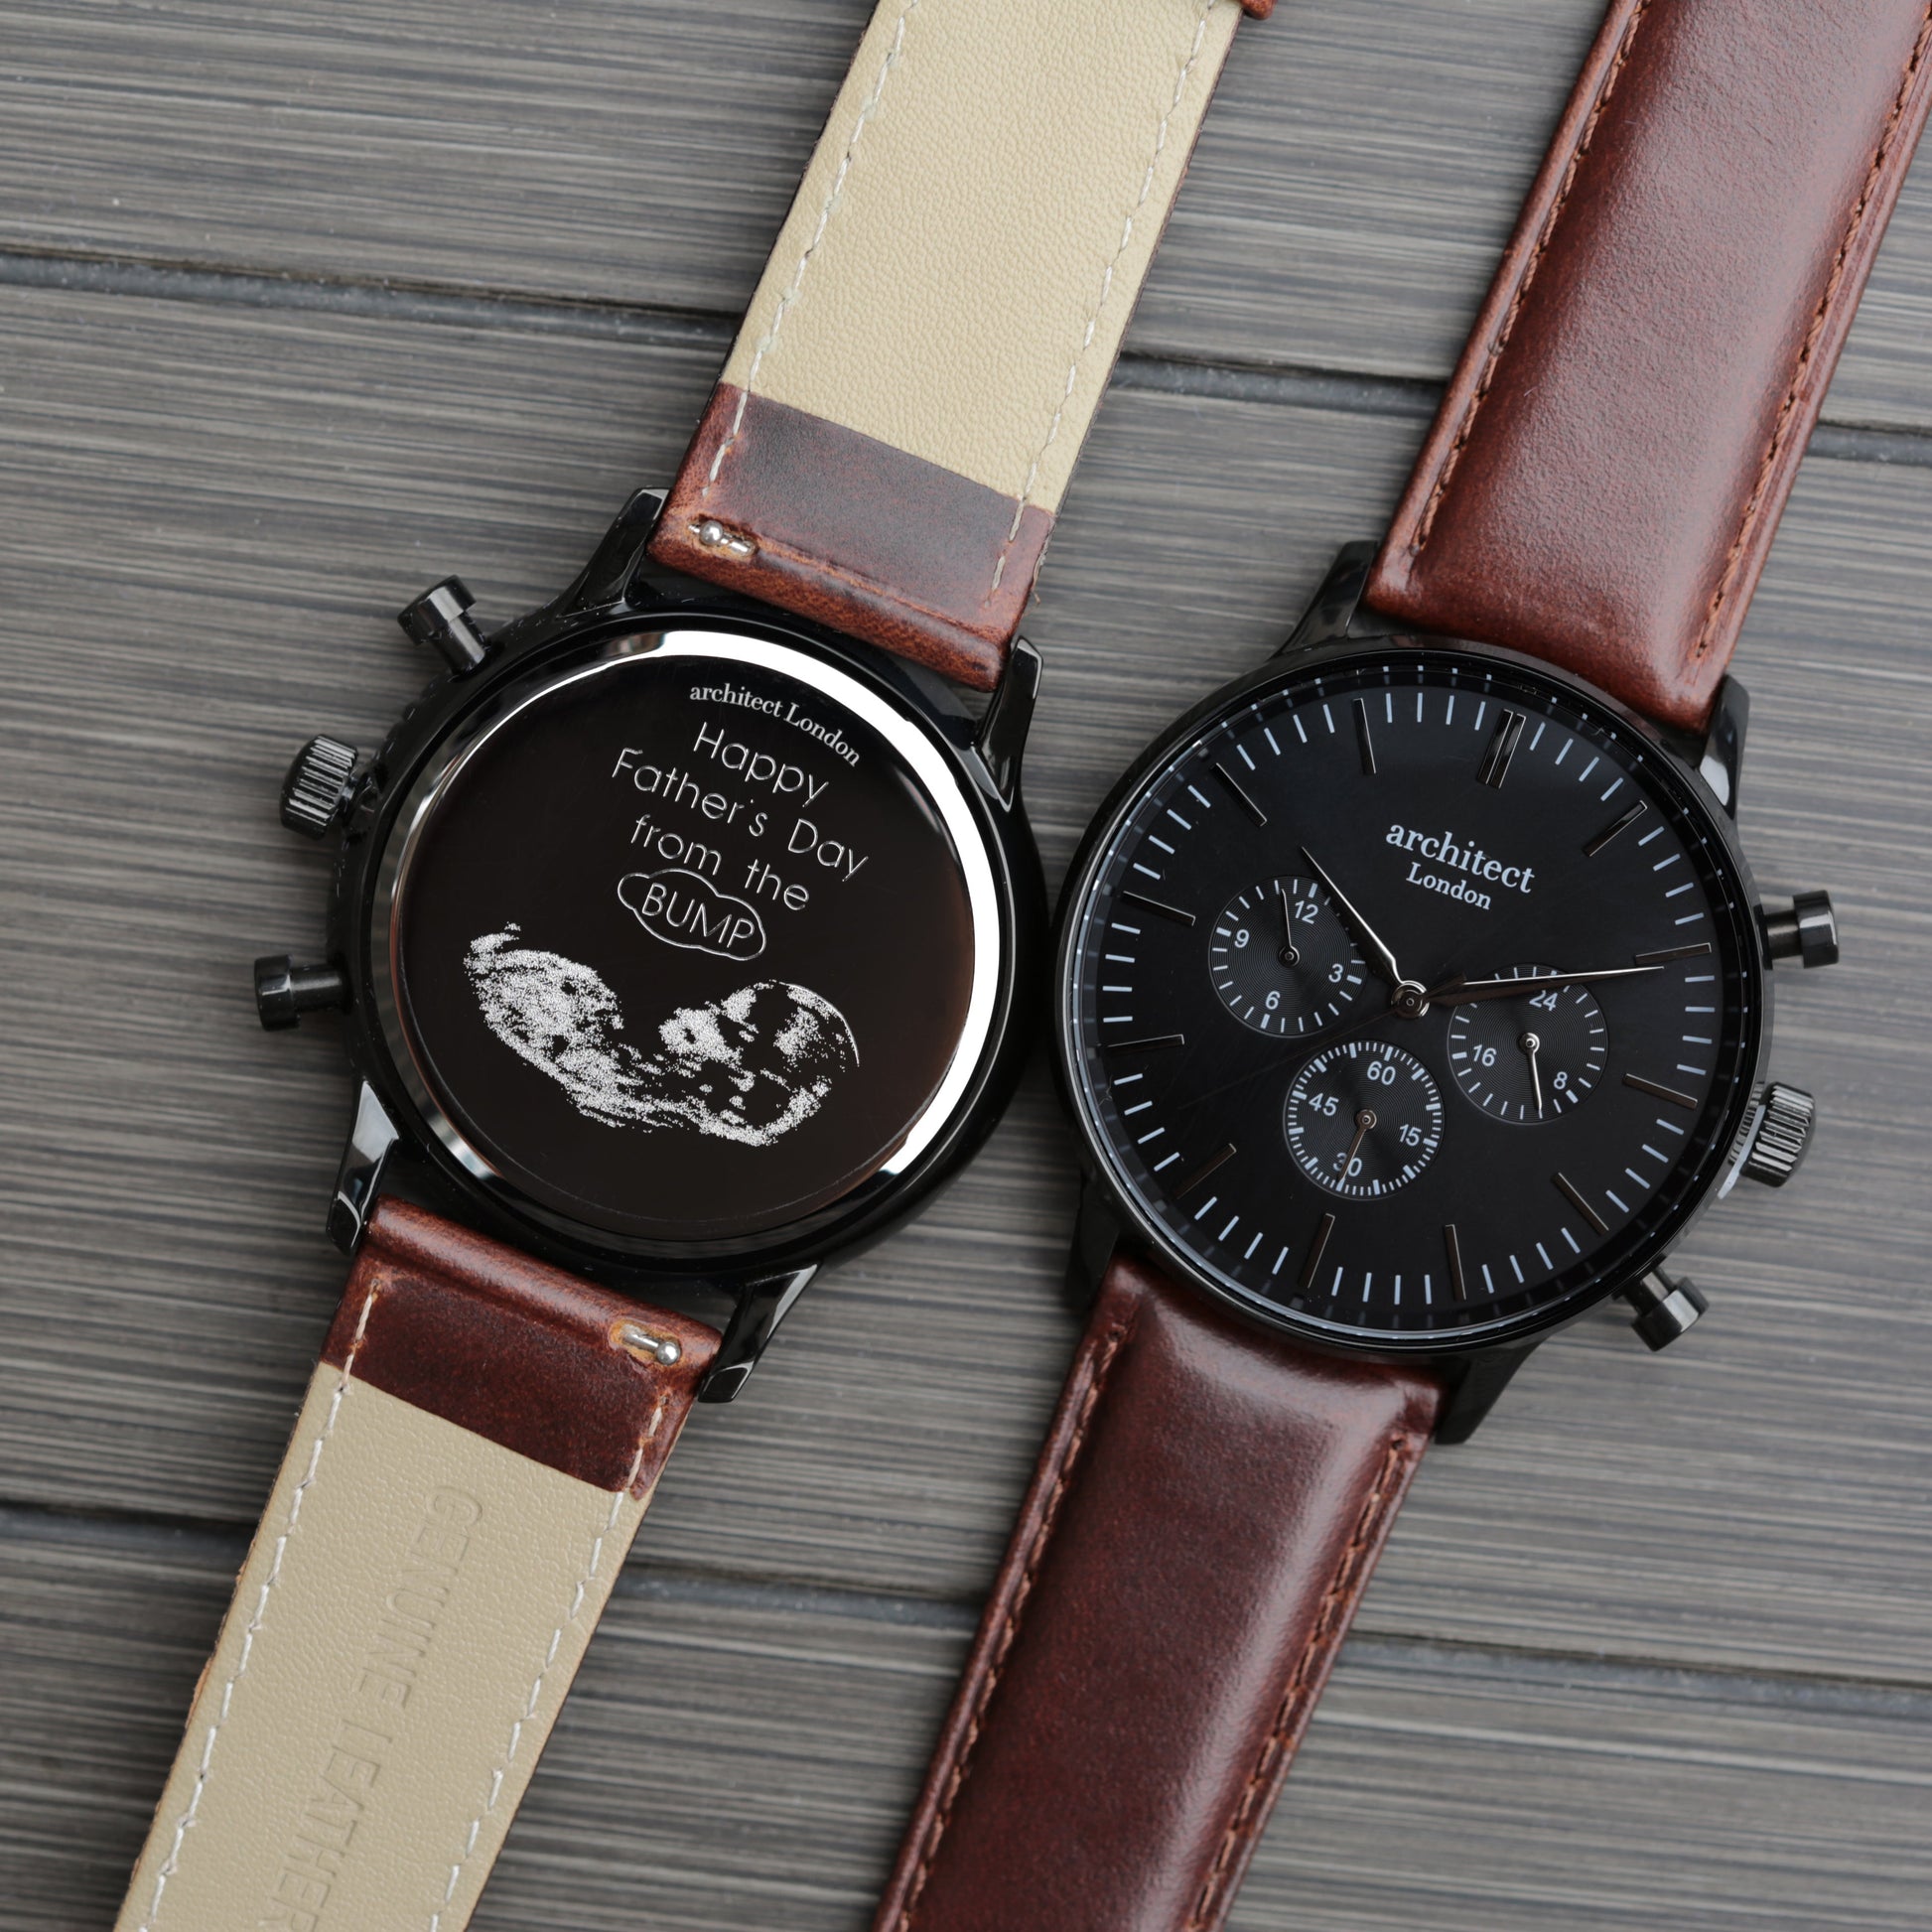 Personalized Men's Watches - Men's Architect Personalized Watch in Black Face Walnut 